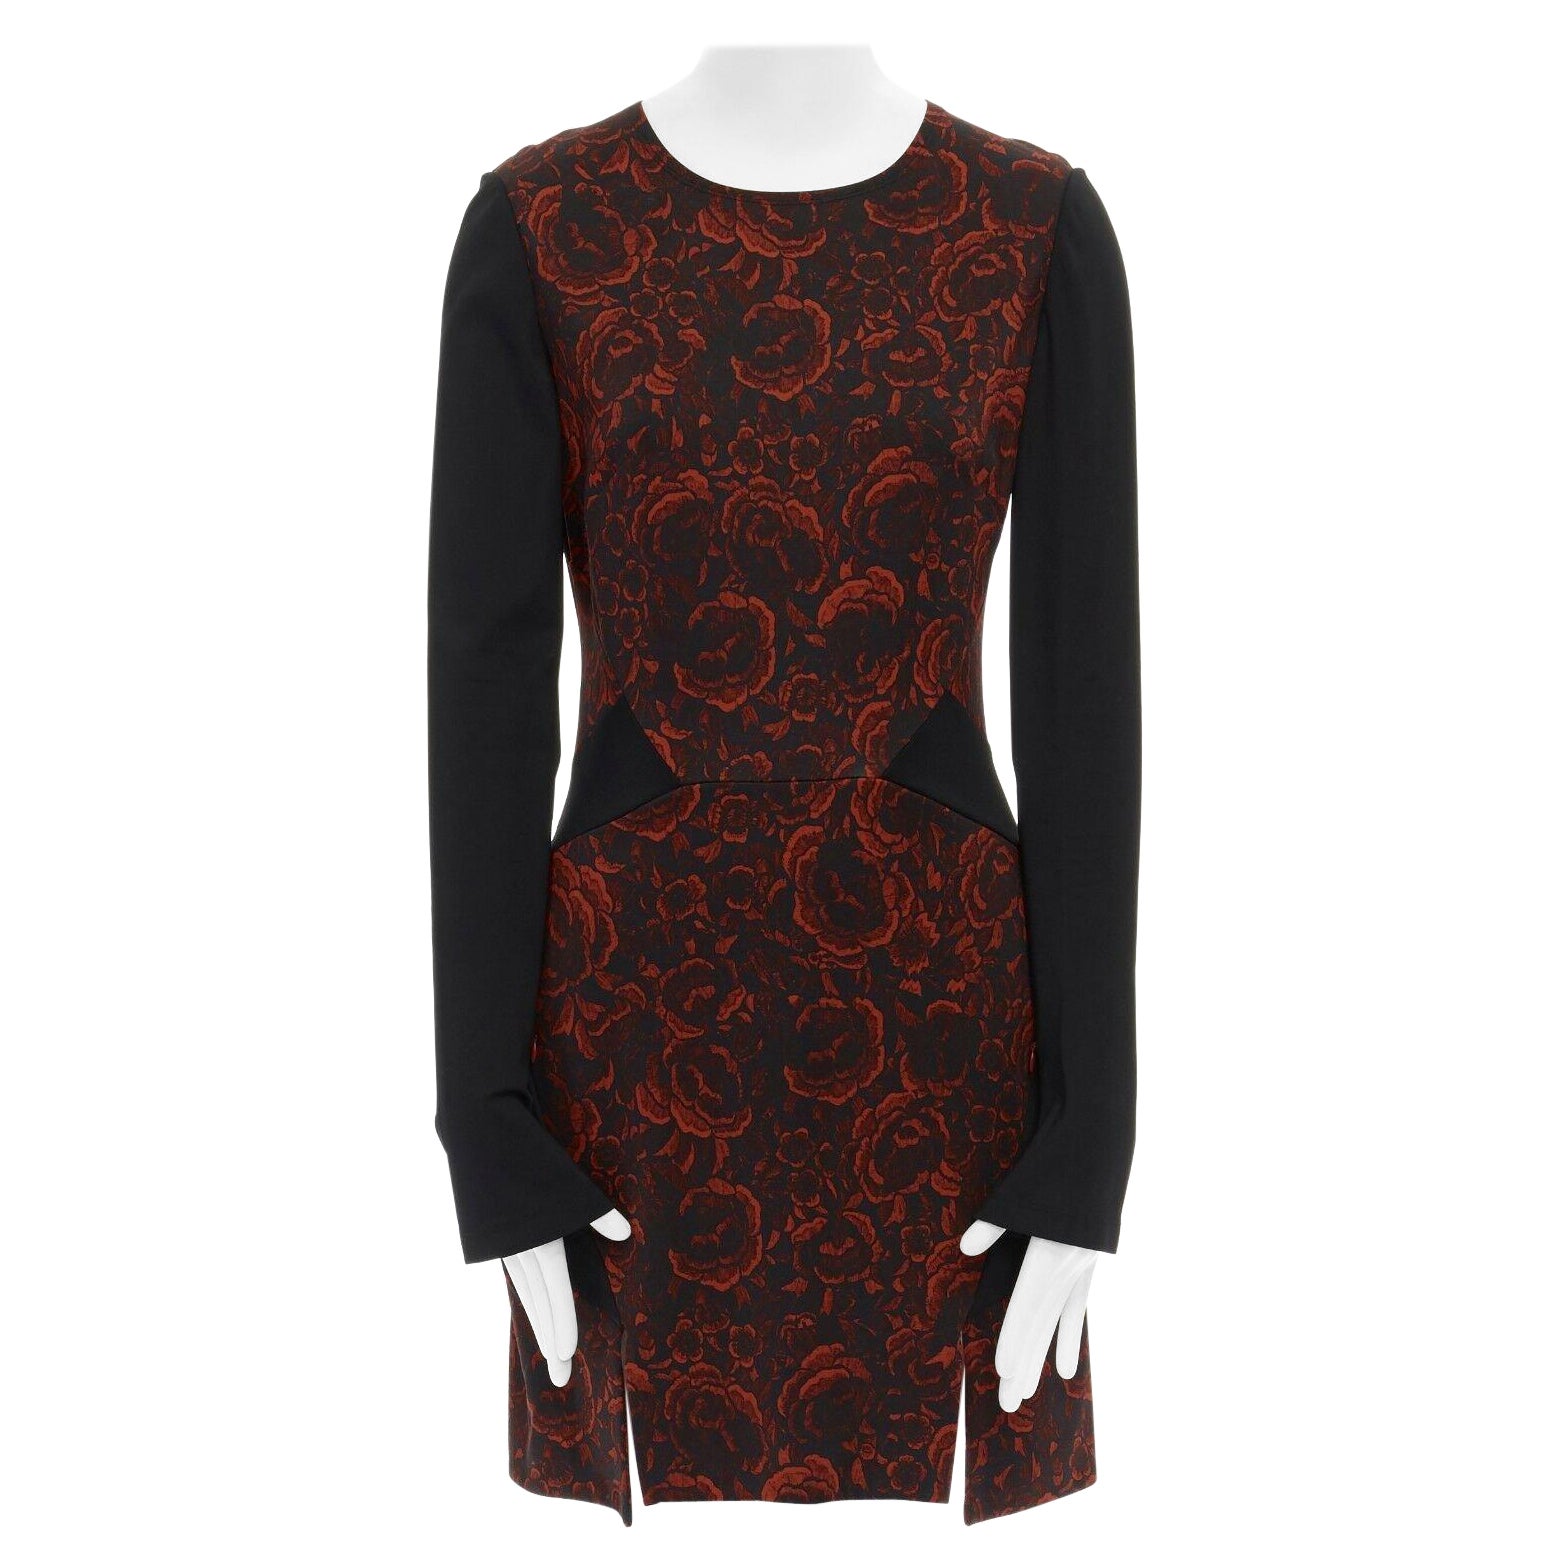 JUST CAVALLI red floral print black panelled dual slit bodycon cocktail dress S